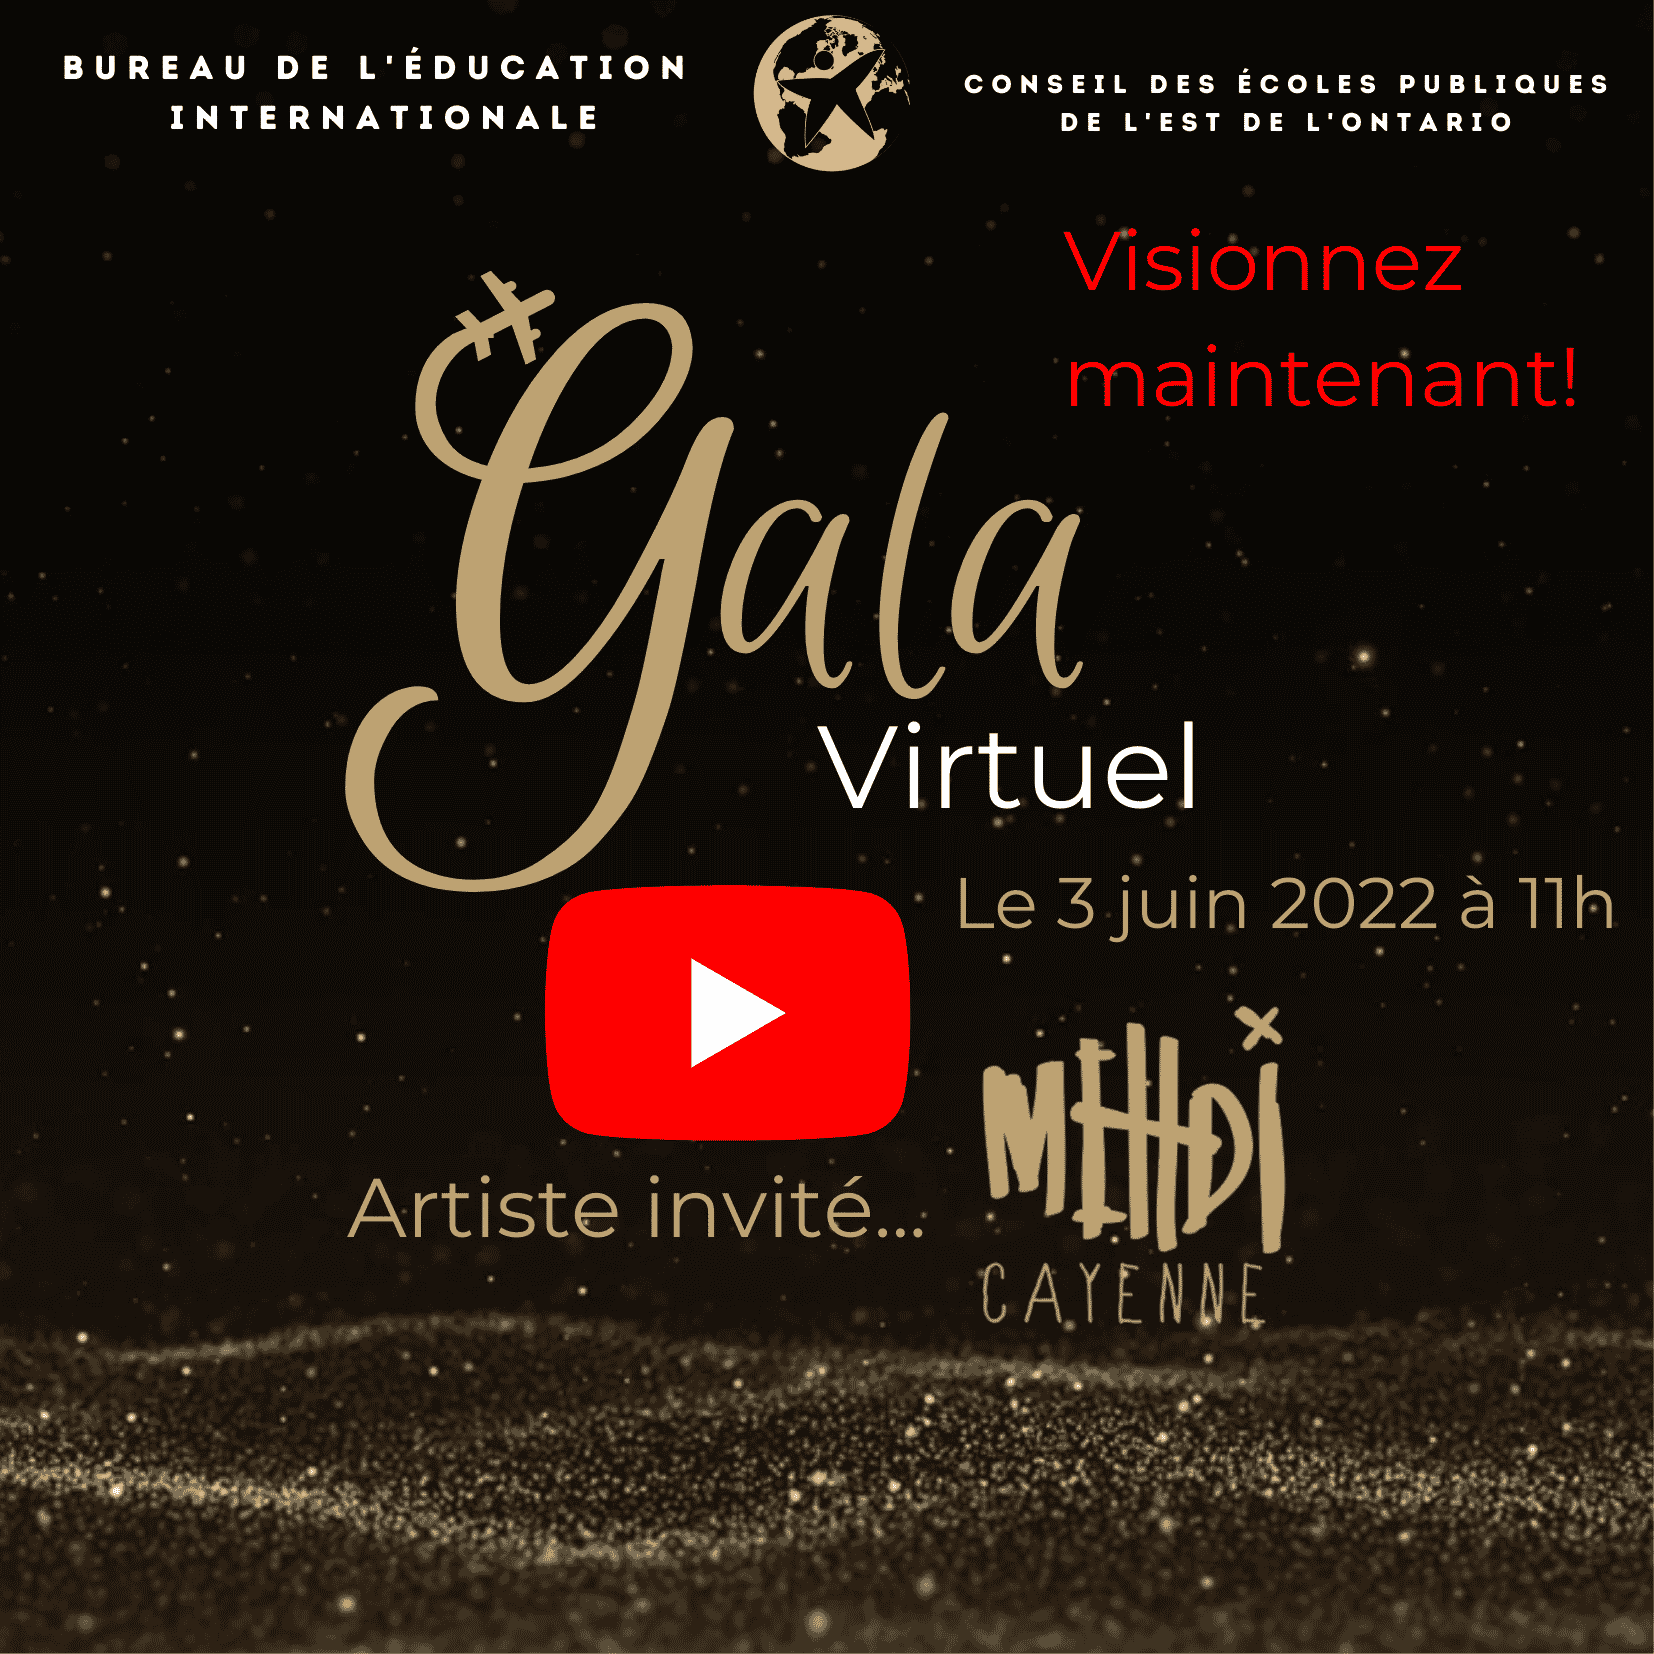 Gala-Virtuel-2022-BEI-CEPEO.png